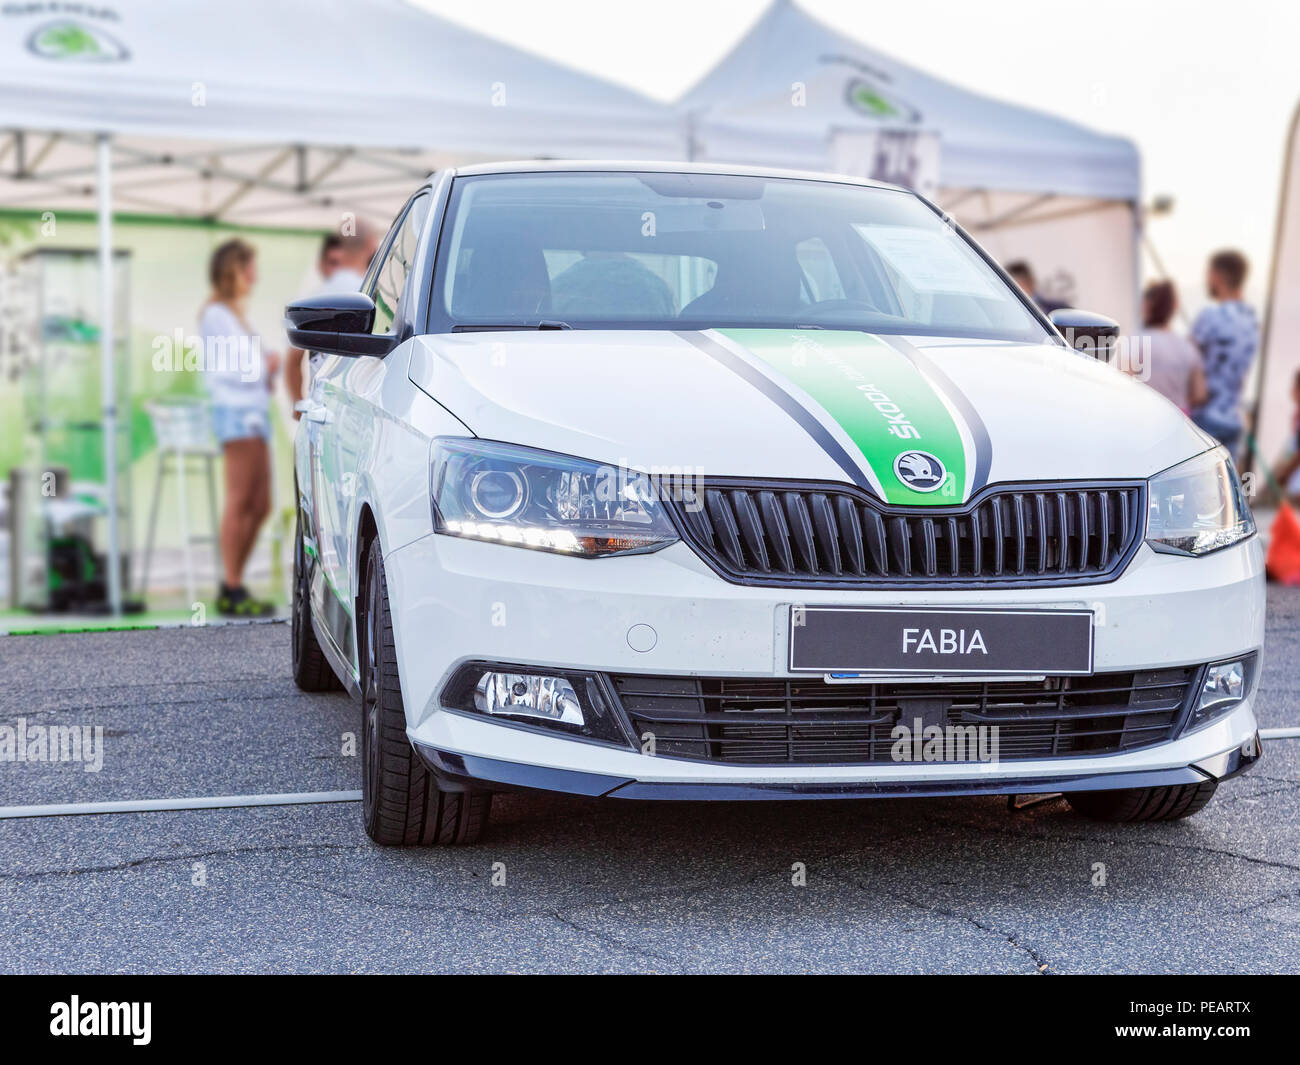 Skoda Car Front View High Resolution Stock Photography and Images - Alamy